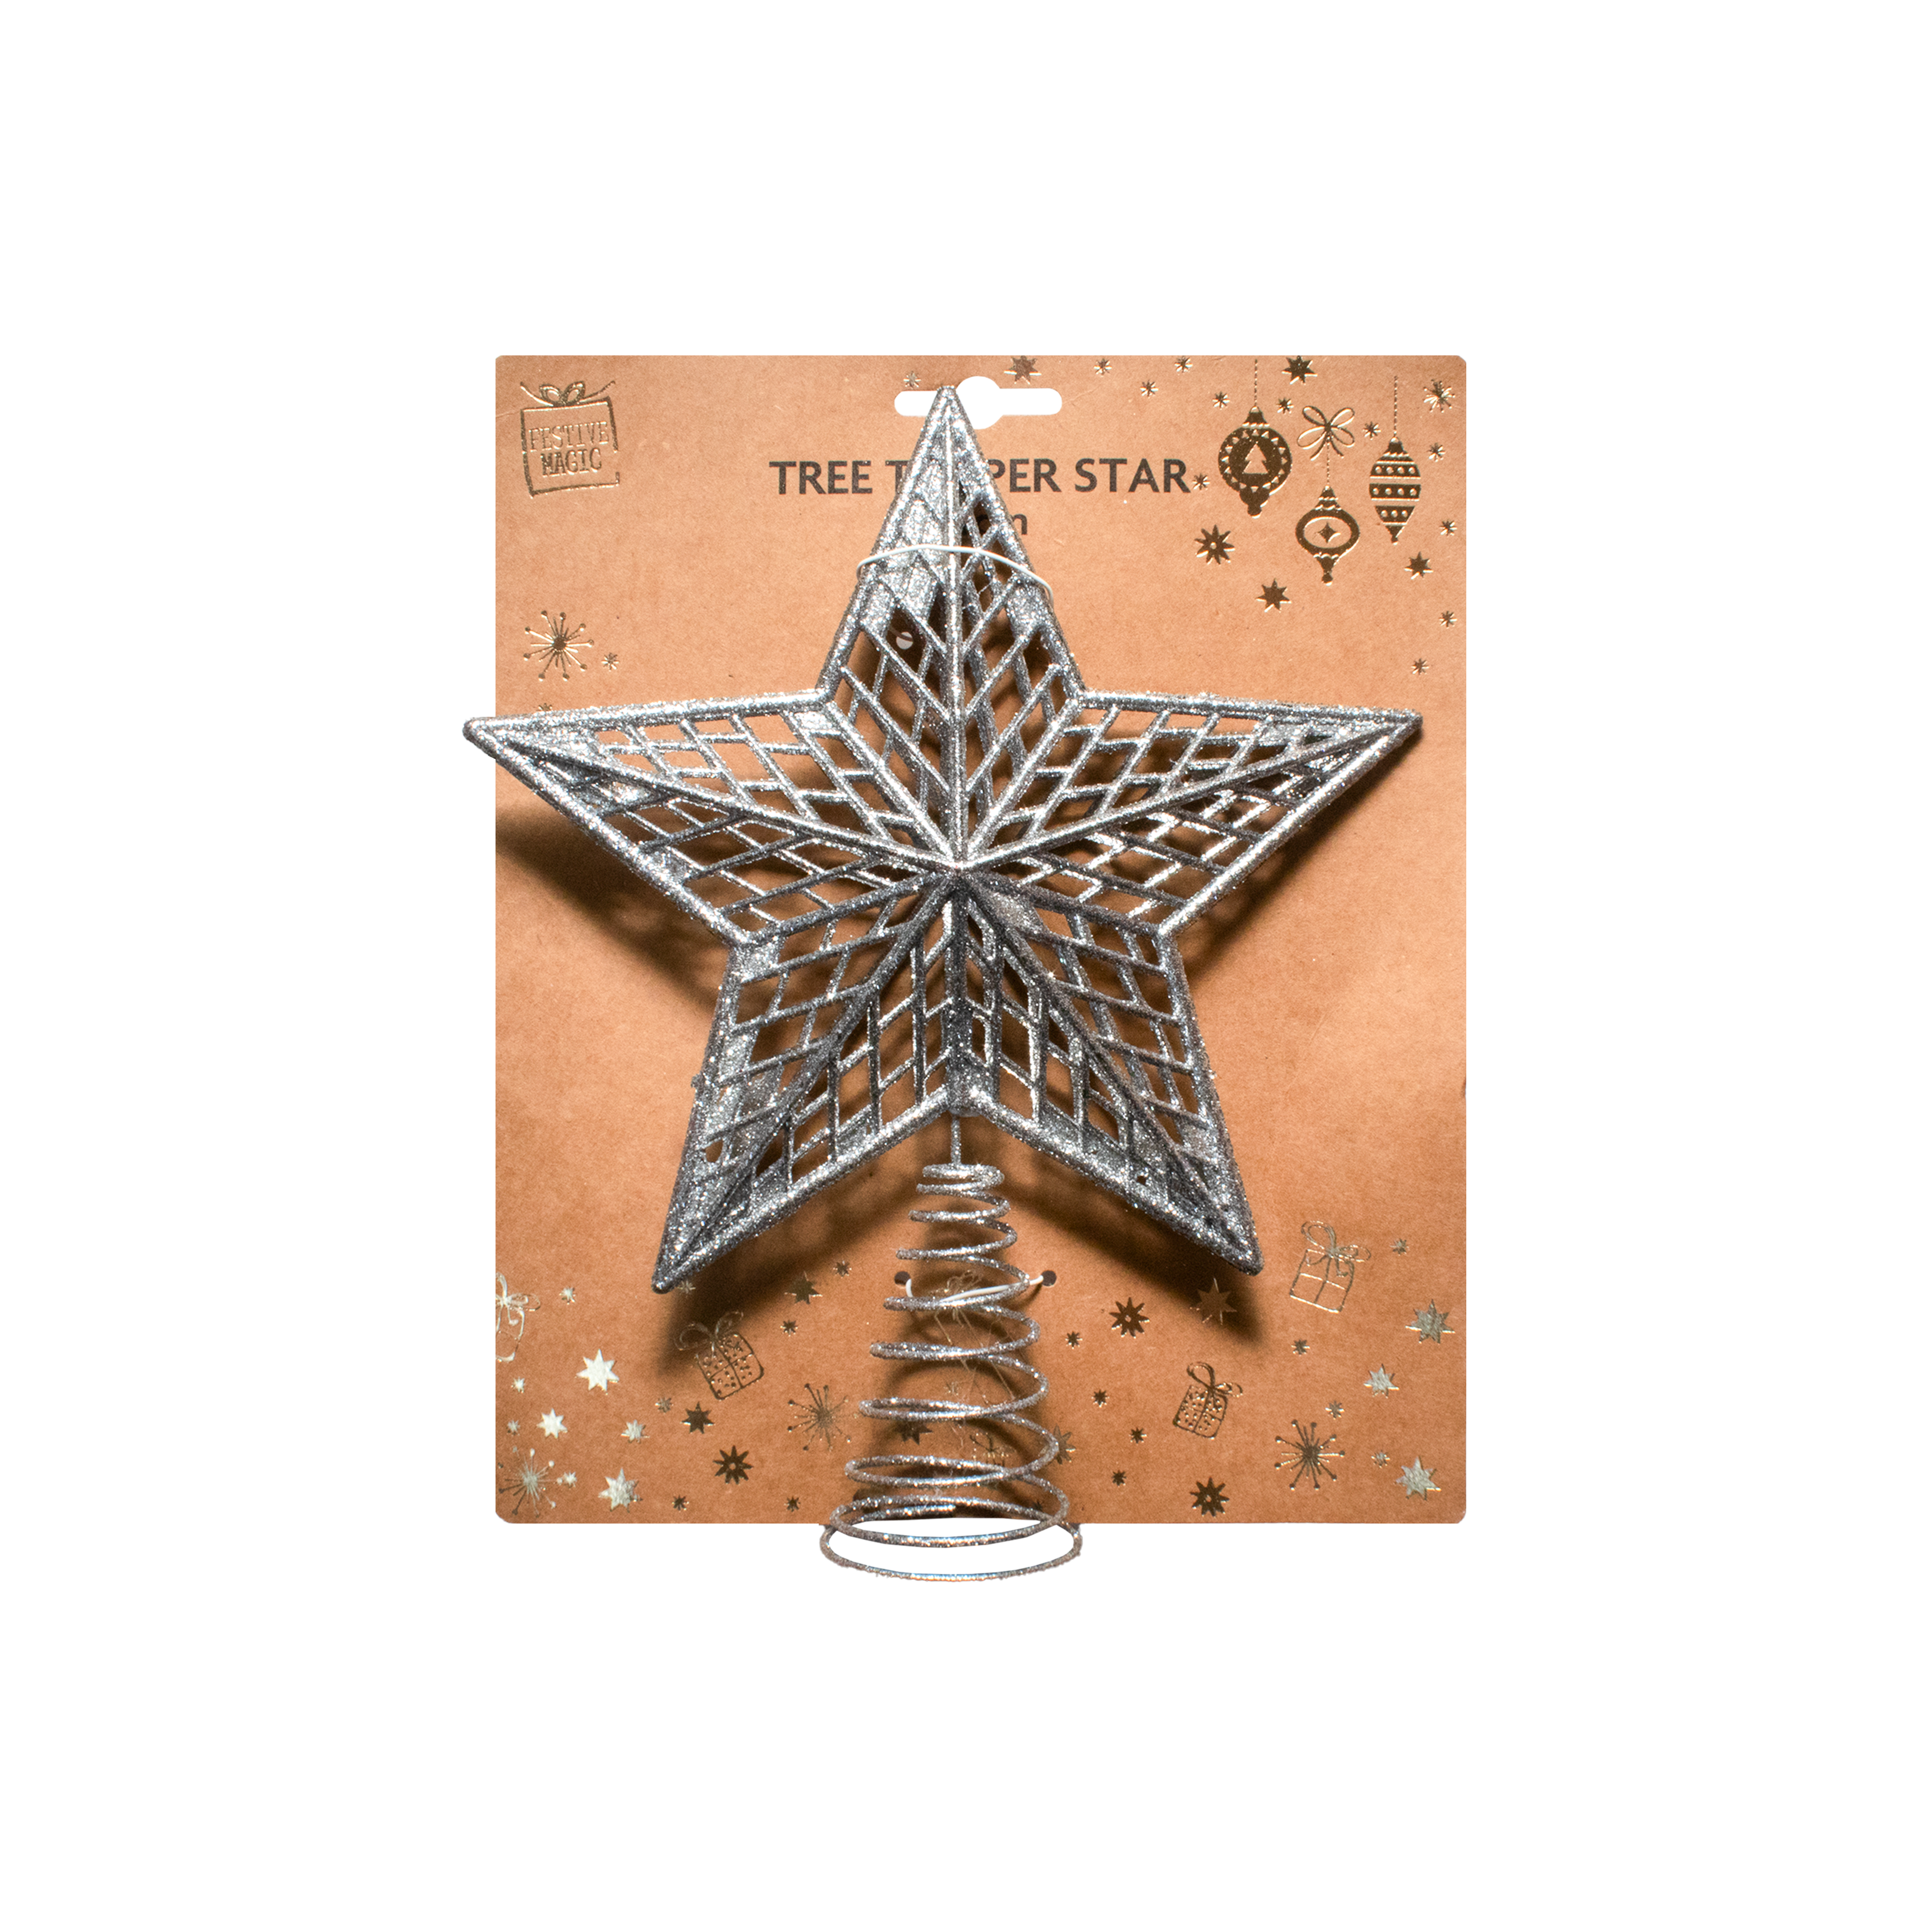 Tree Topper - Star, 20cm, Assorted  Color / Assorted Design 1pc